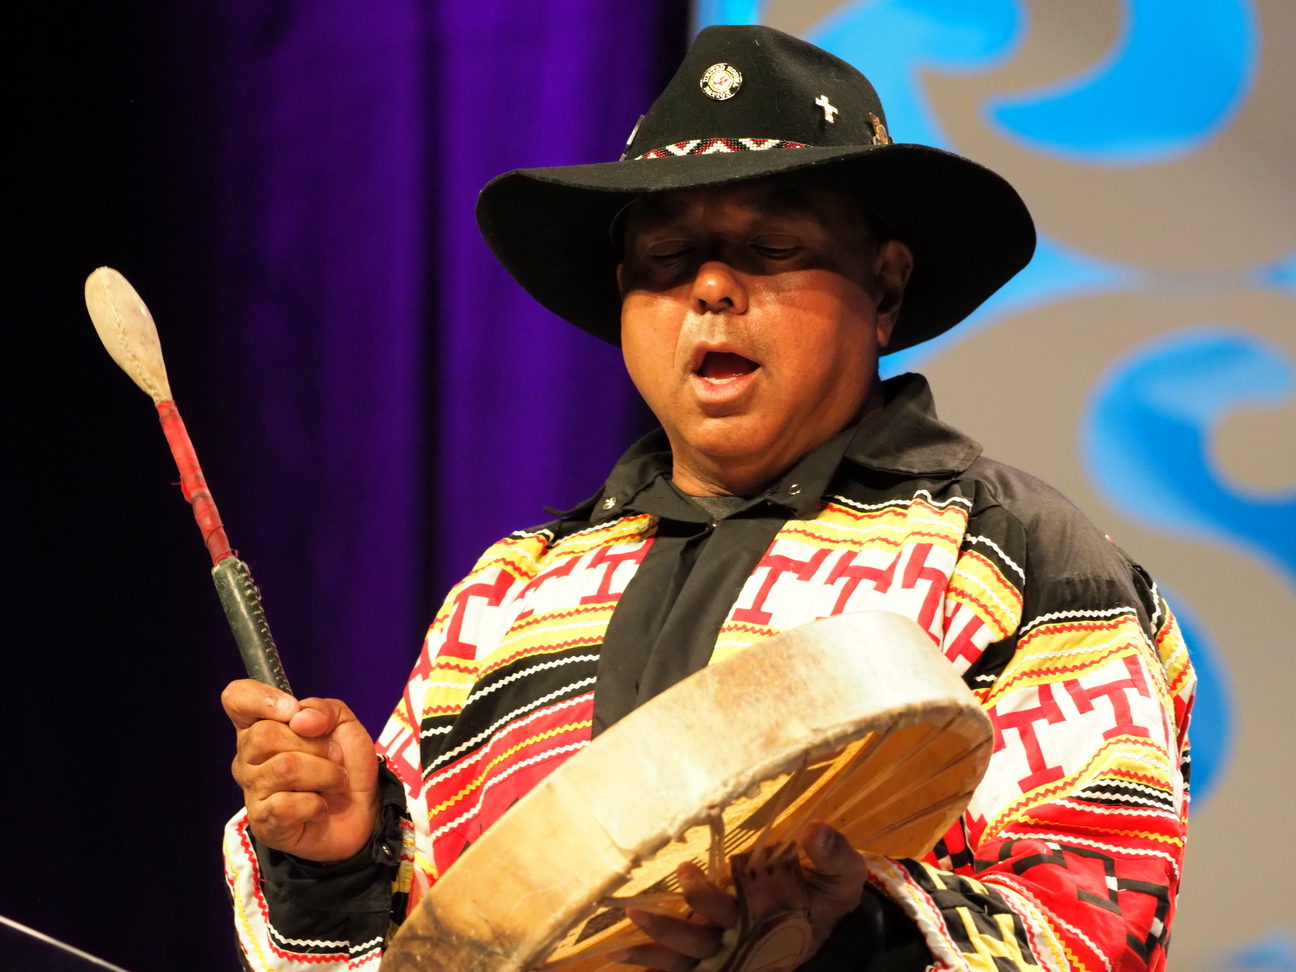 Netroots Nation 2018 gets a traditional welcome from Louisana's largest tribe